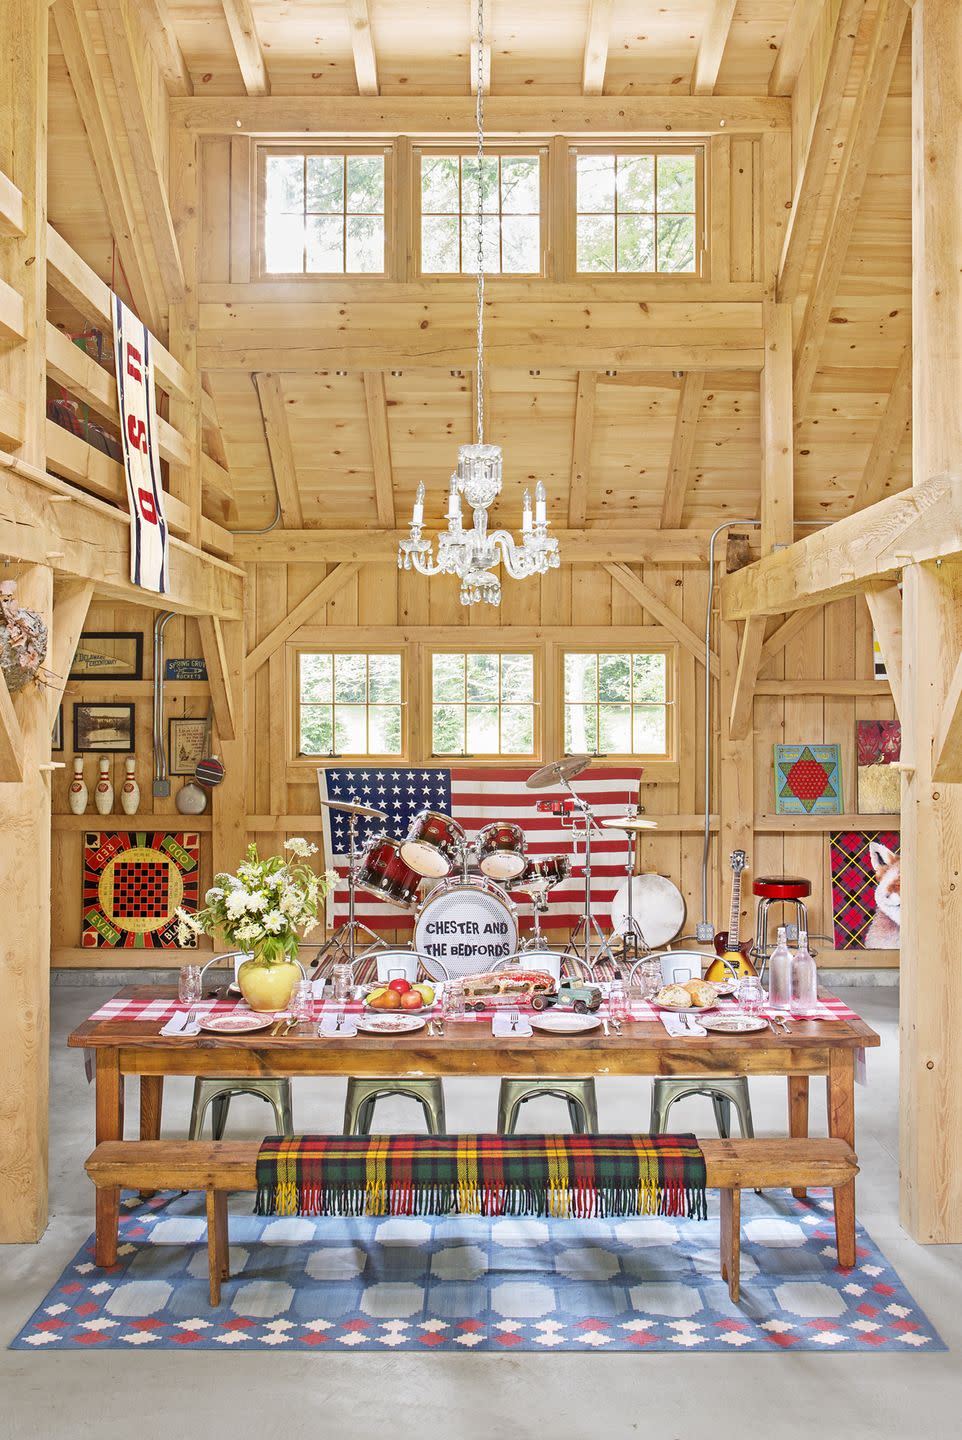 barn interior with americana accents and a dining table set up for dinner